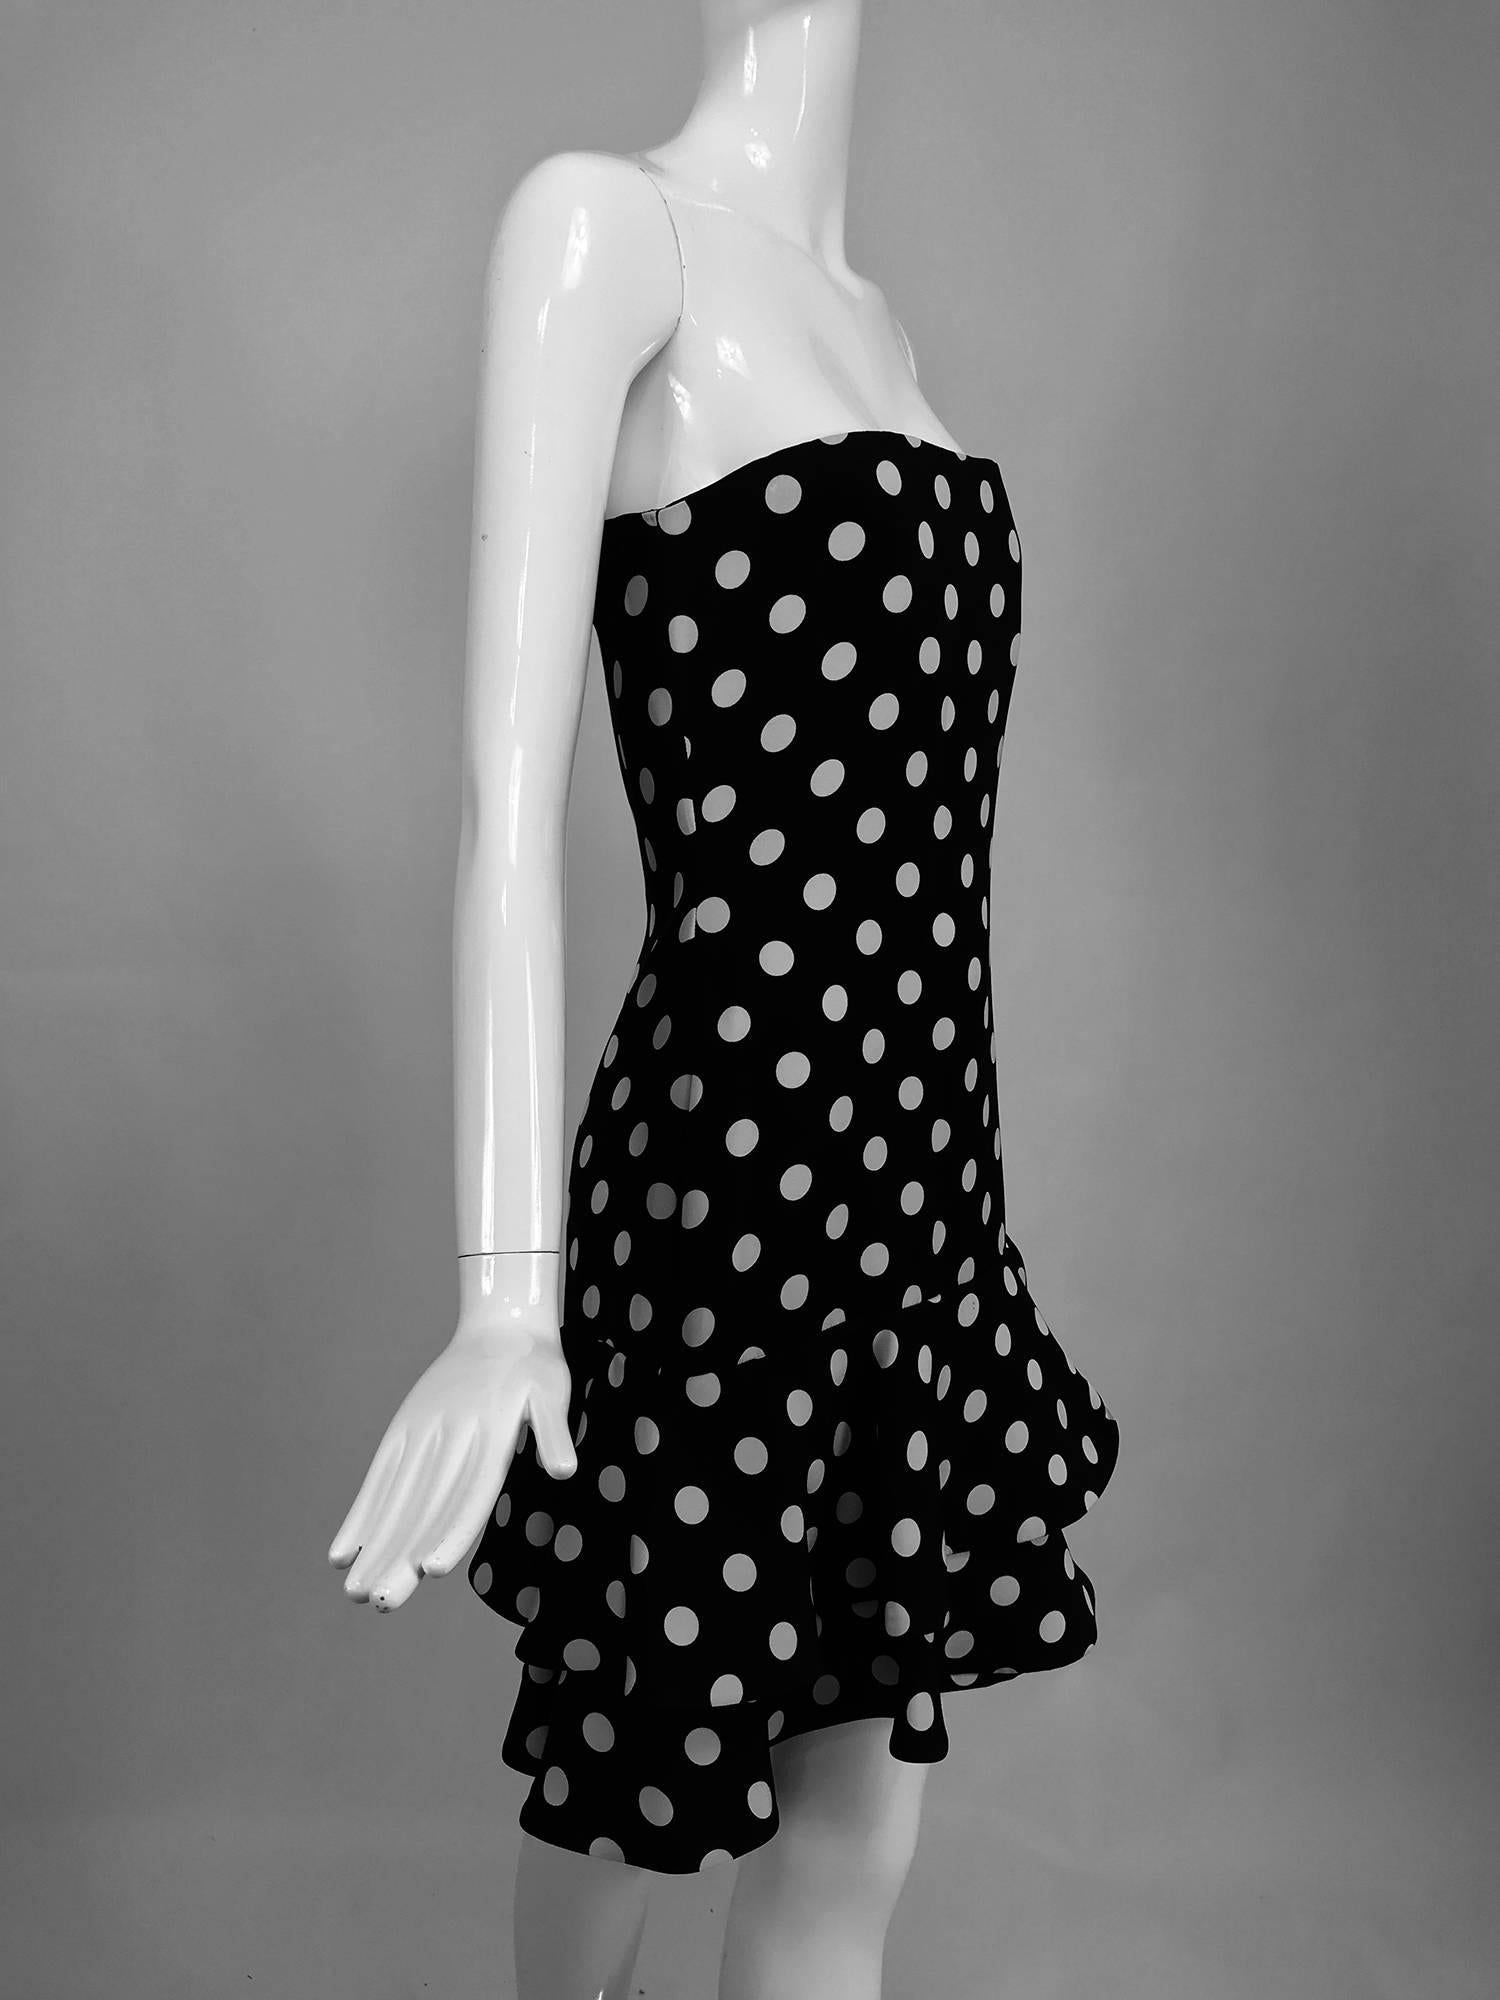 Women's Carolyne Roehm black and white polka dot strapless dress and jacket 1990s For Sale